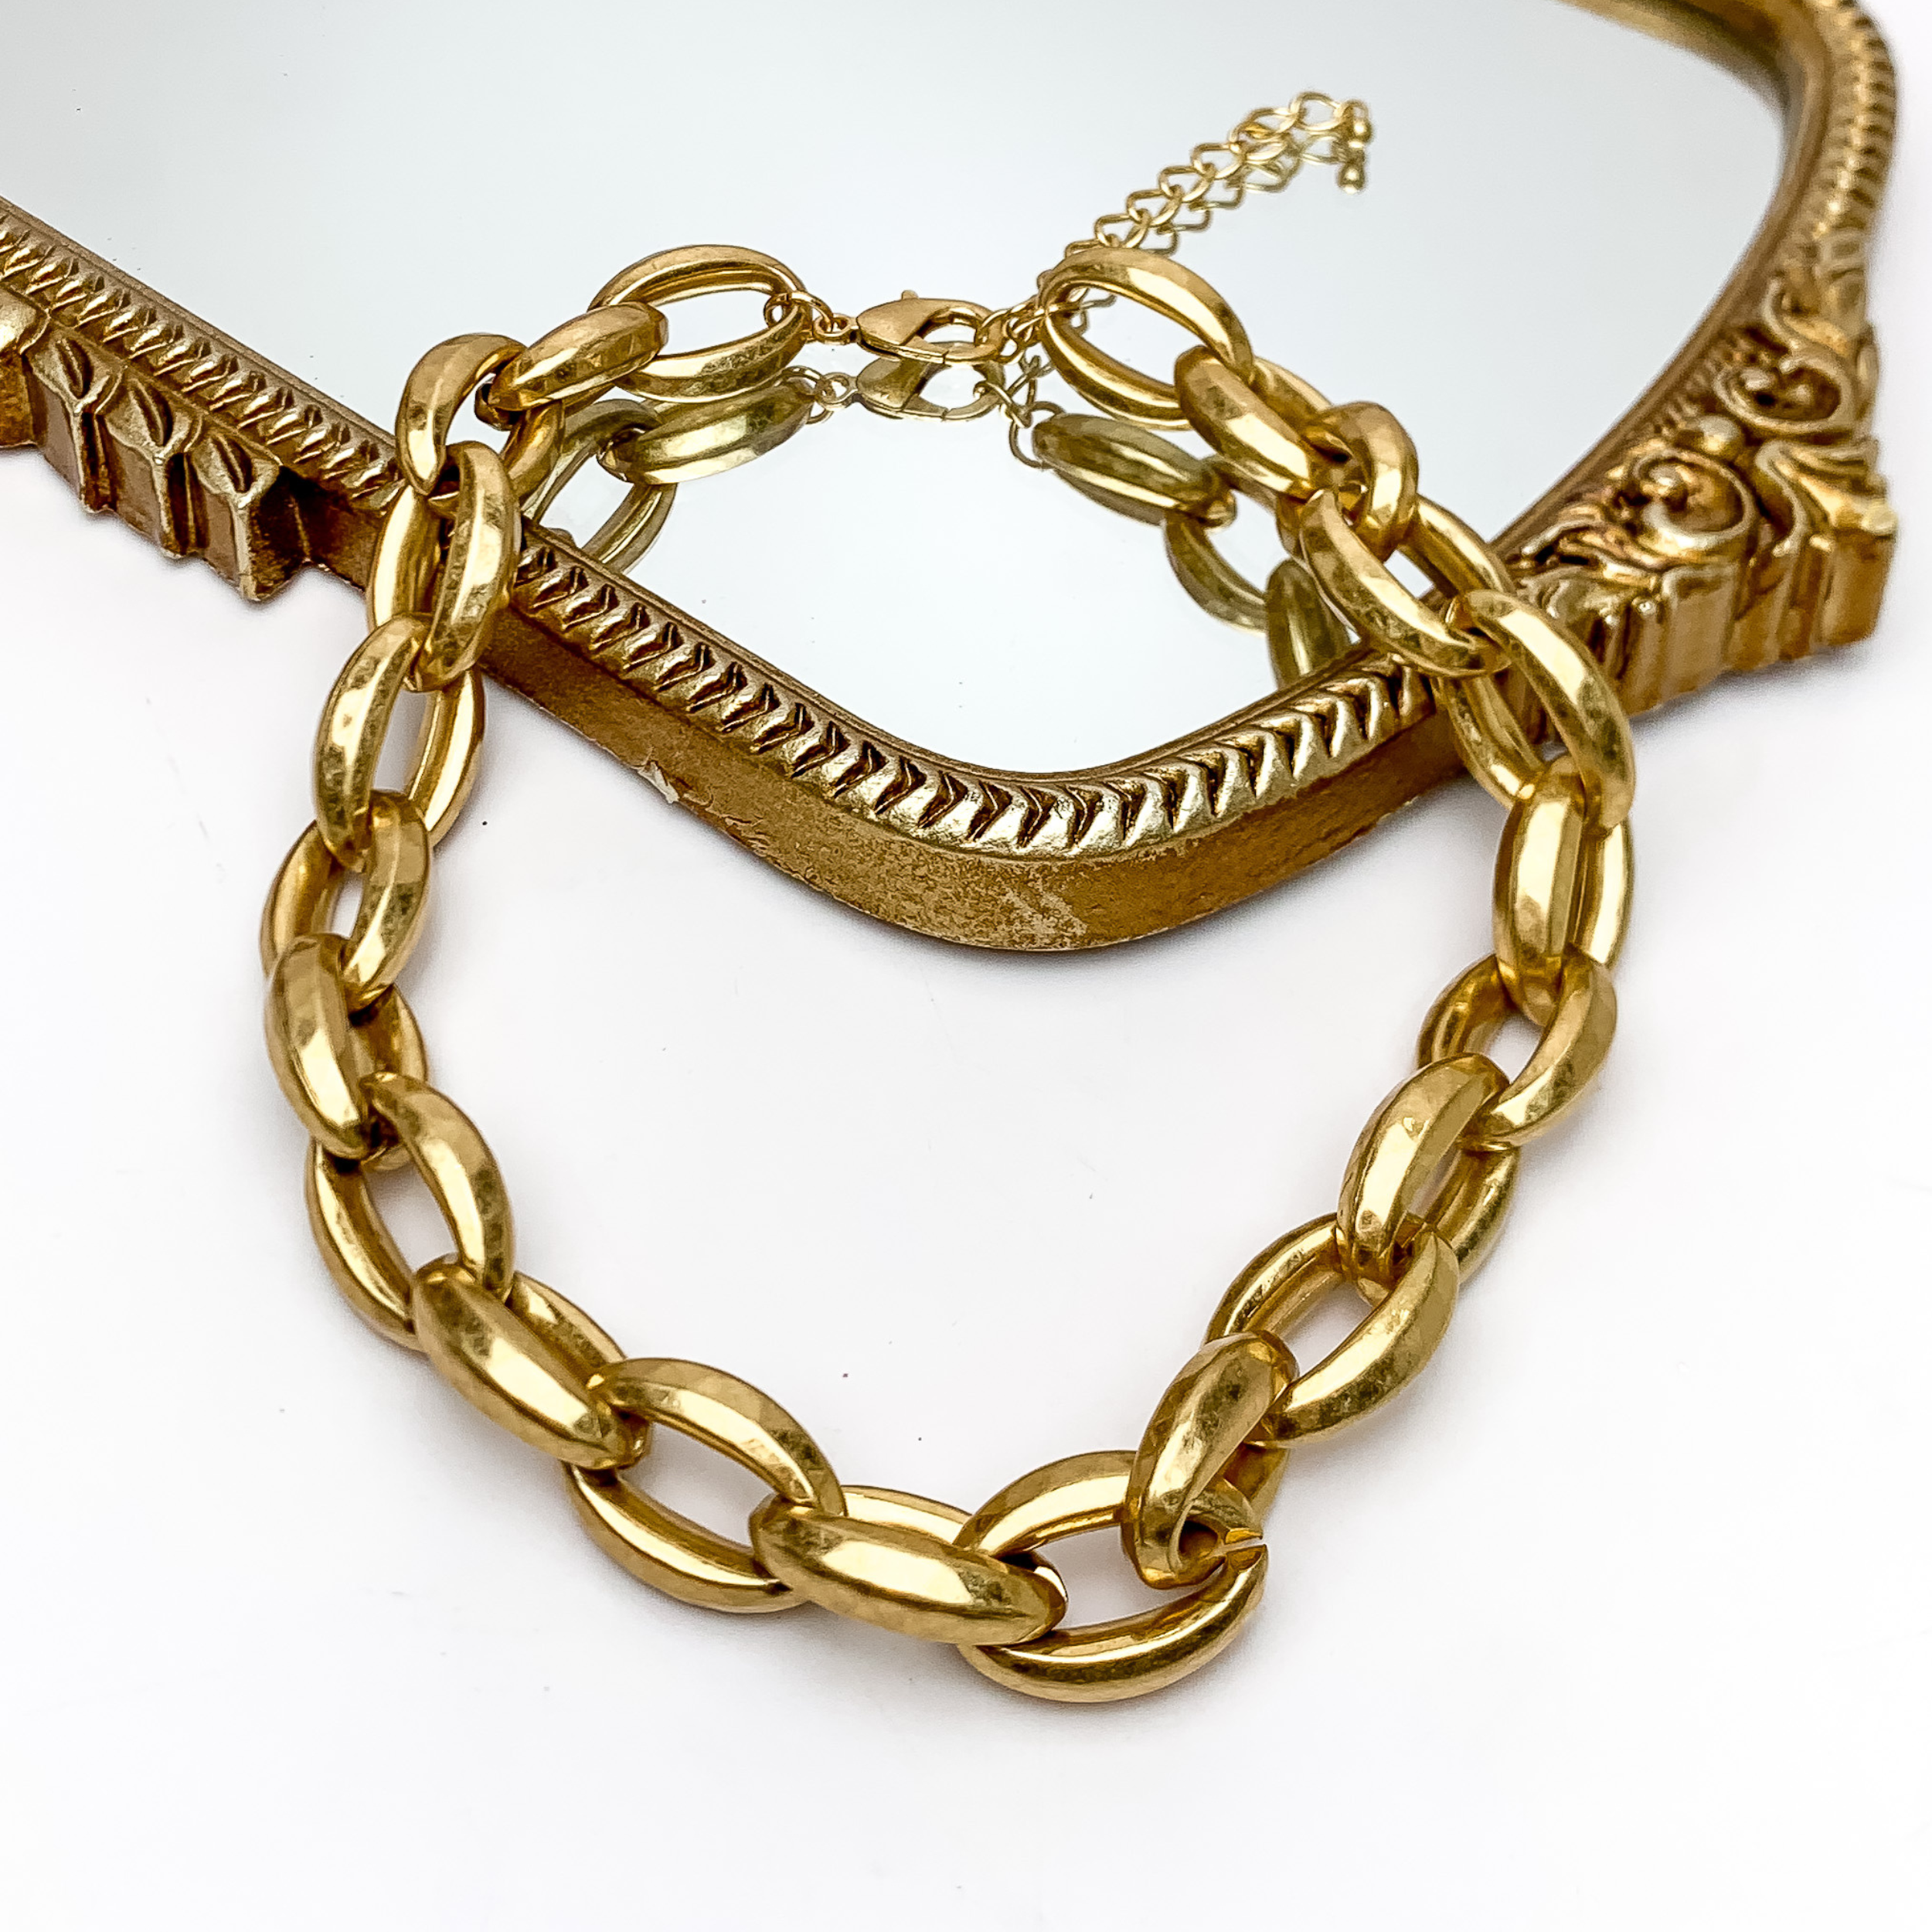 Cute and Classy Chunky Gold Tone Chain Necklace. Pictured on a white background with part of the necklace on a mirror.